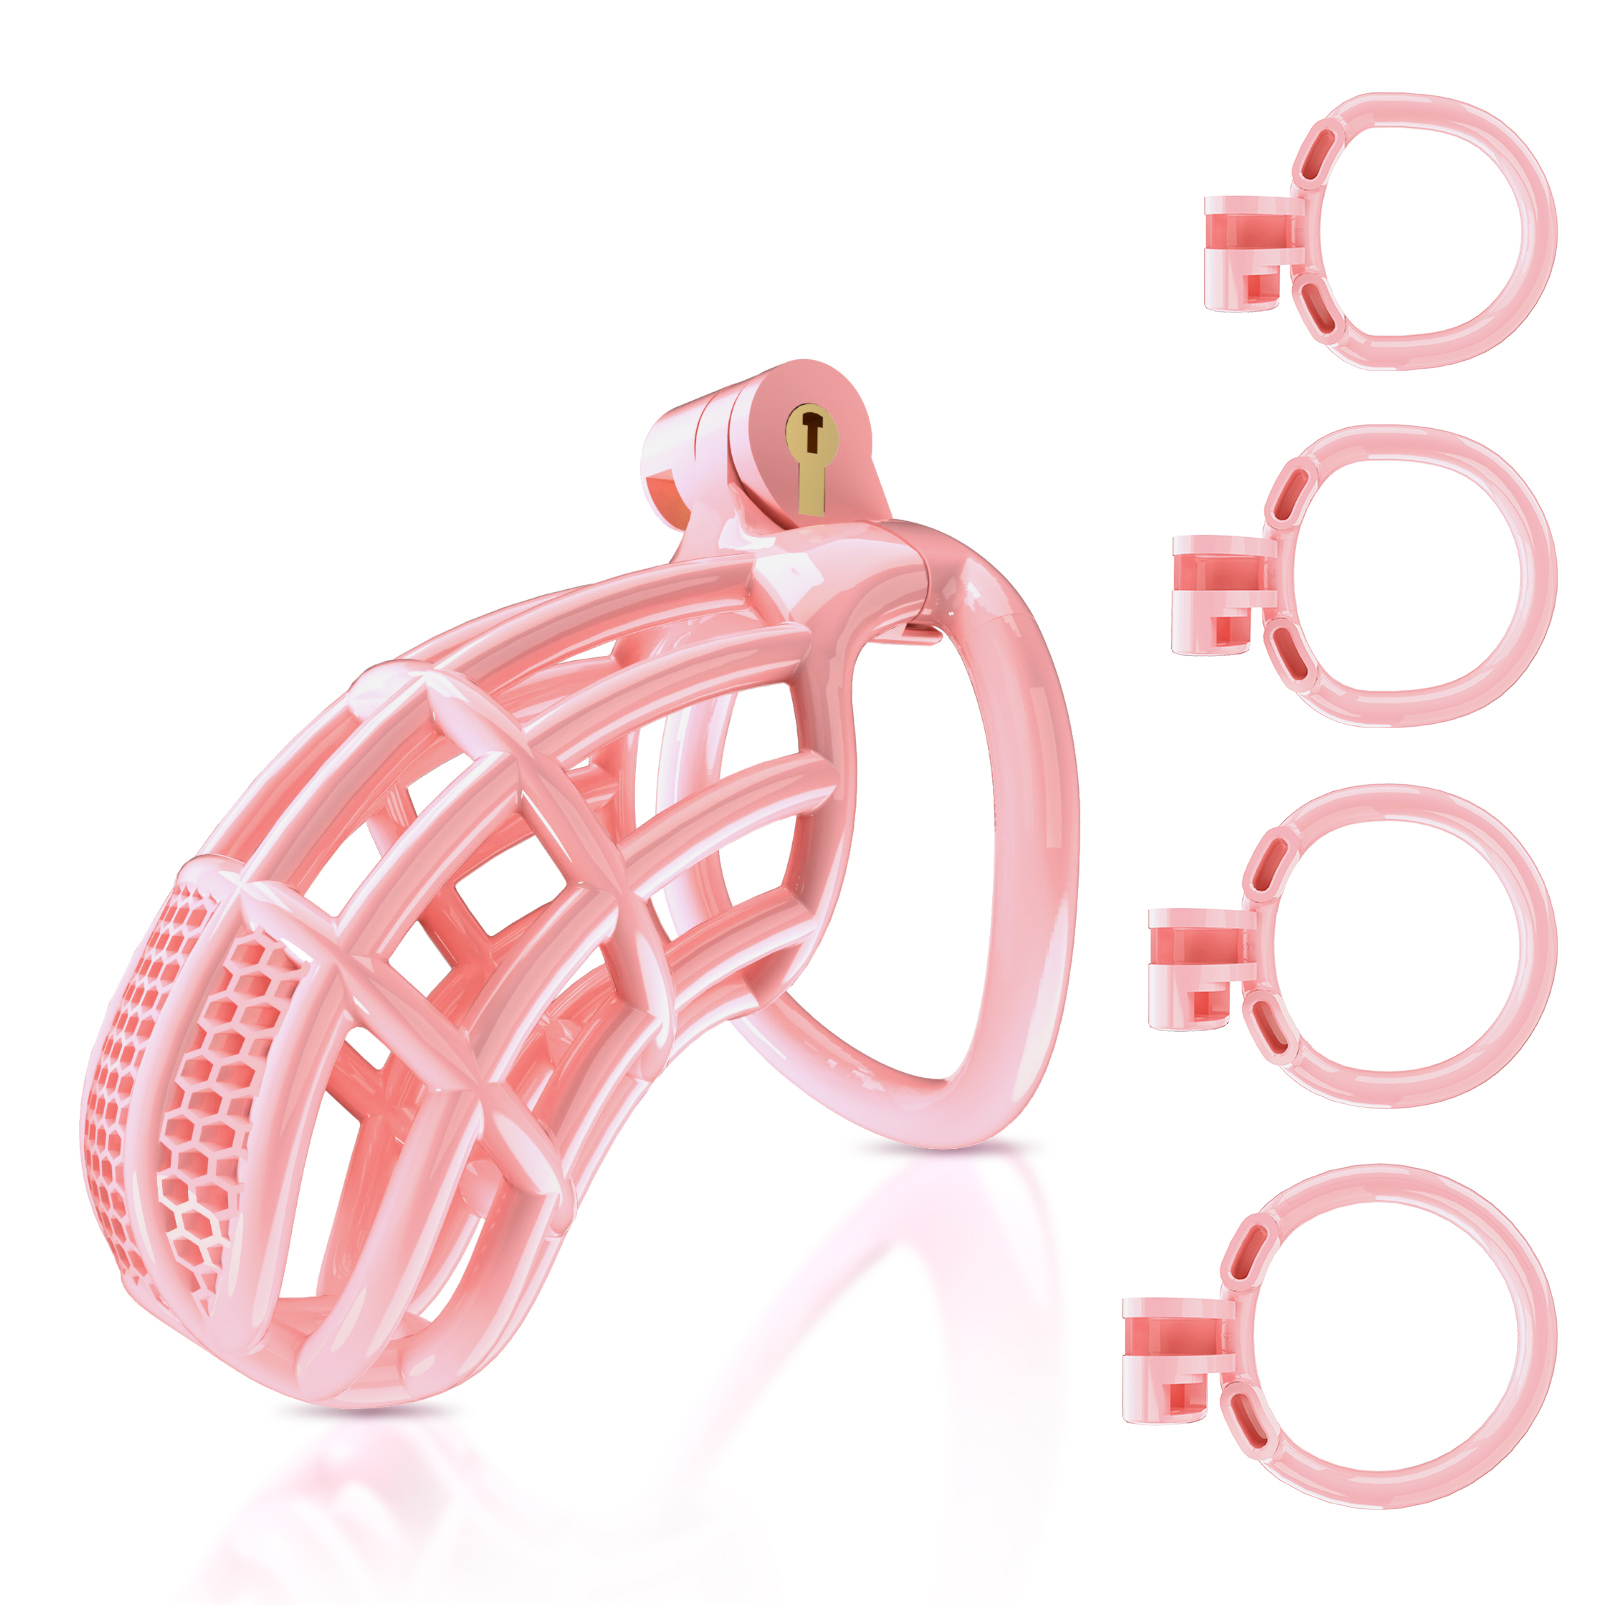 Male Chastity Device Cock Cage - UTIMI Large Plastic Chastity Cage for Man Penis Exercise 3D Printed Bondage Gear & Accessories Lightweight Adult Sex Toy with 4 Sizes Rings Invisible Lock and Key